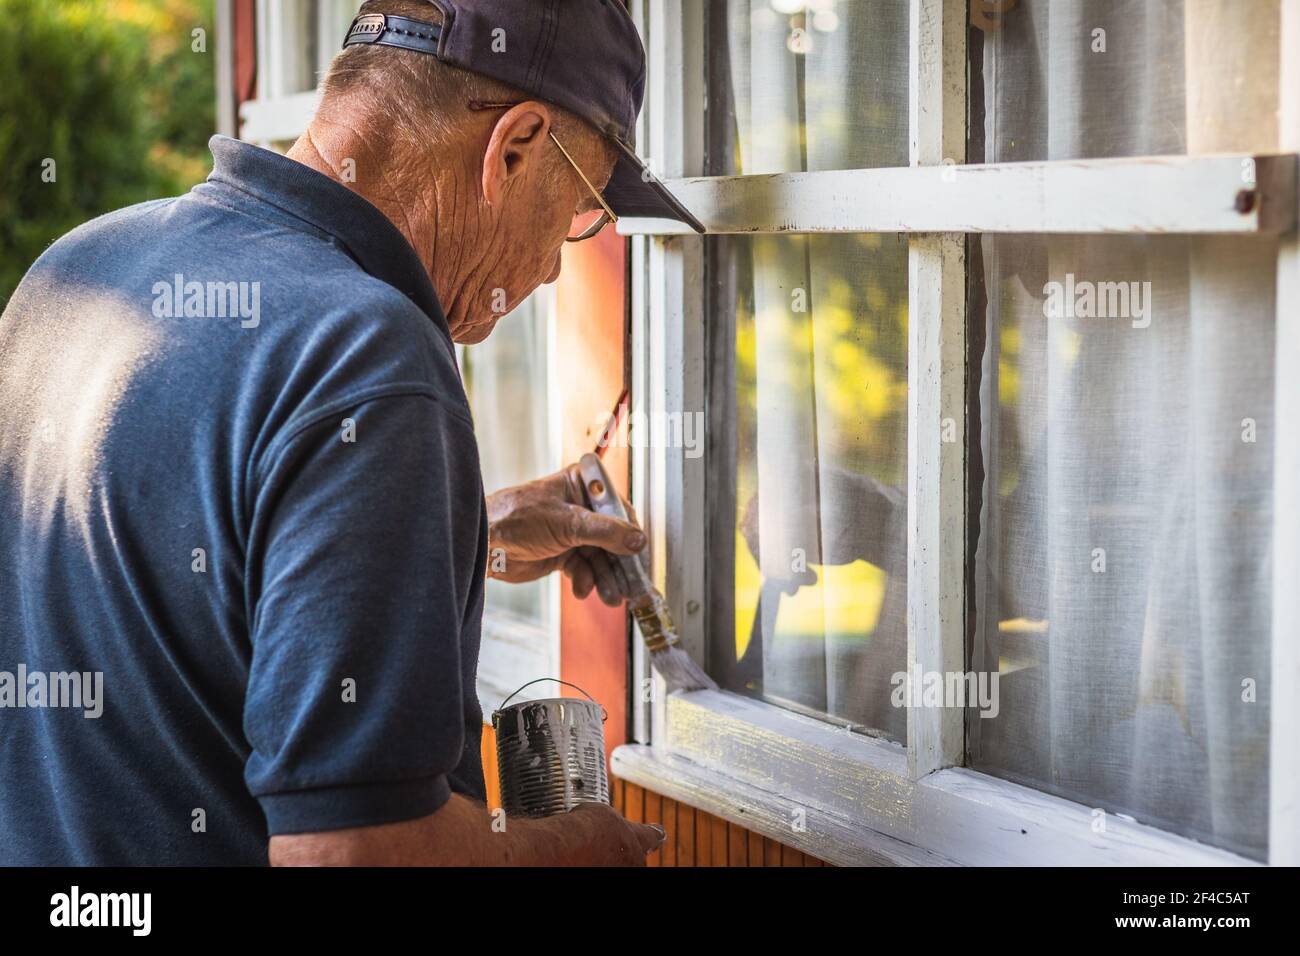 Senior craftsperson is painting house exterior. Home improvement. Old man repairing window frame. Stock Photo